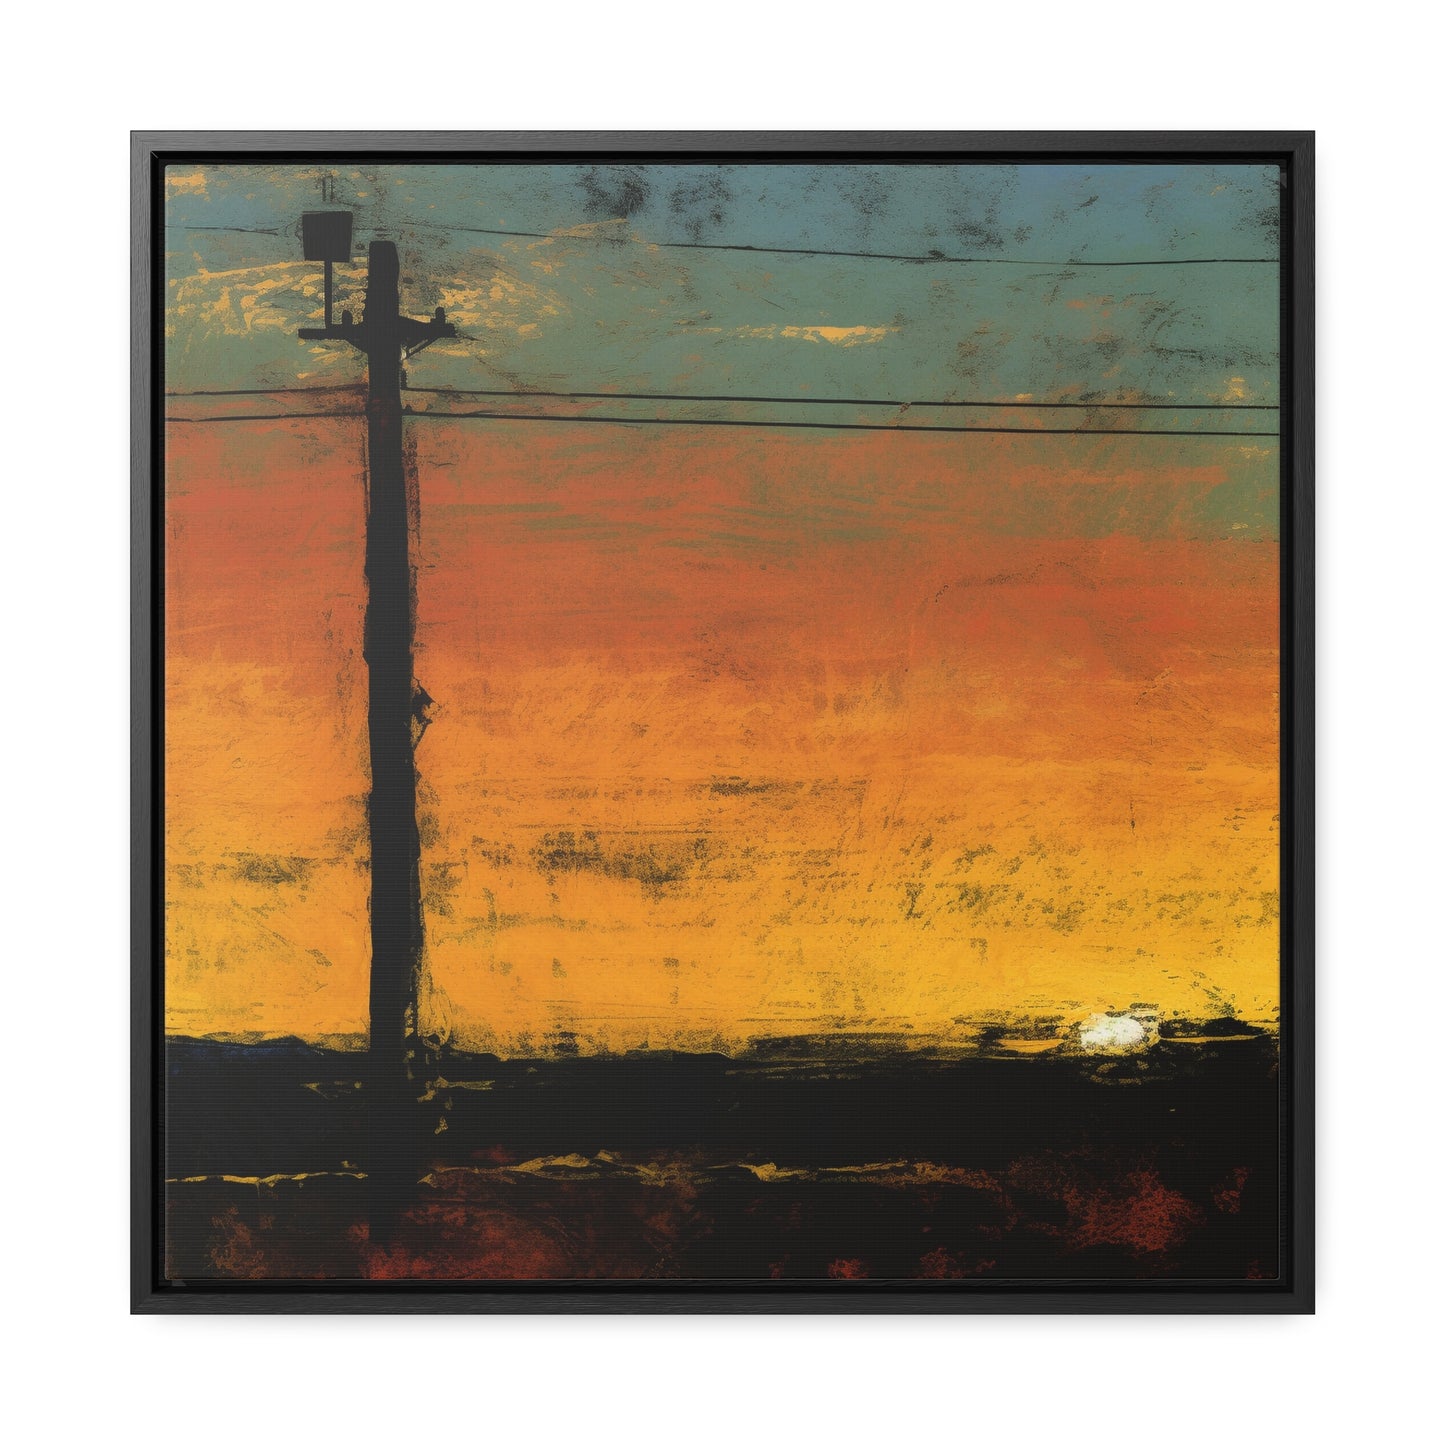 Land of the Sun 82, Valentinii, Gallery Canvas Wraps, Square Frame